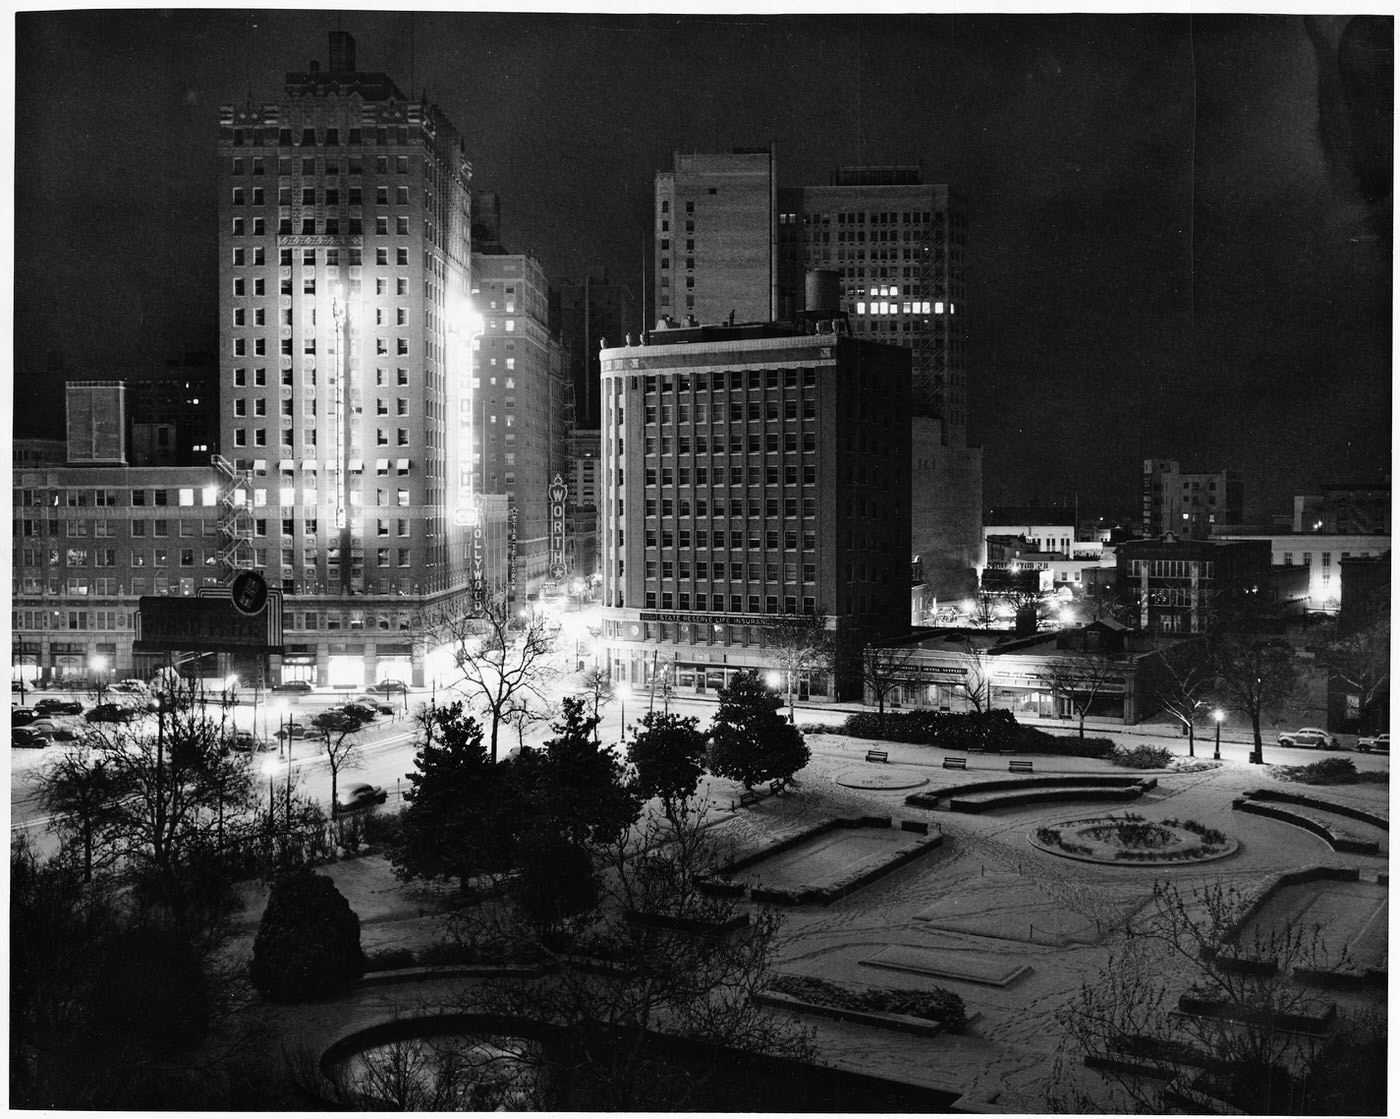 Burk Burnett Park at night in the snow, at 7th and Lamar streets; lights from surrounding buildings Texas Electric Service Company and Neil P. Anderson, 1948